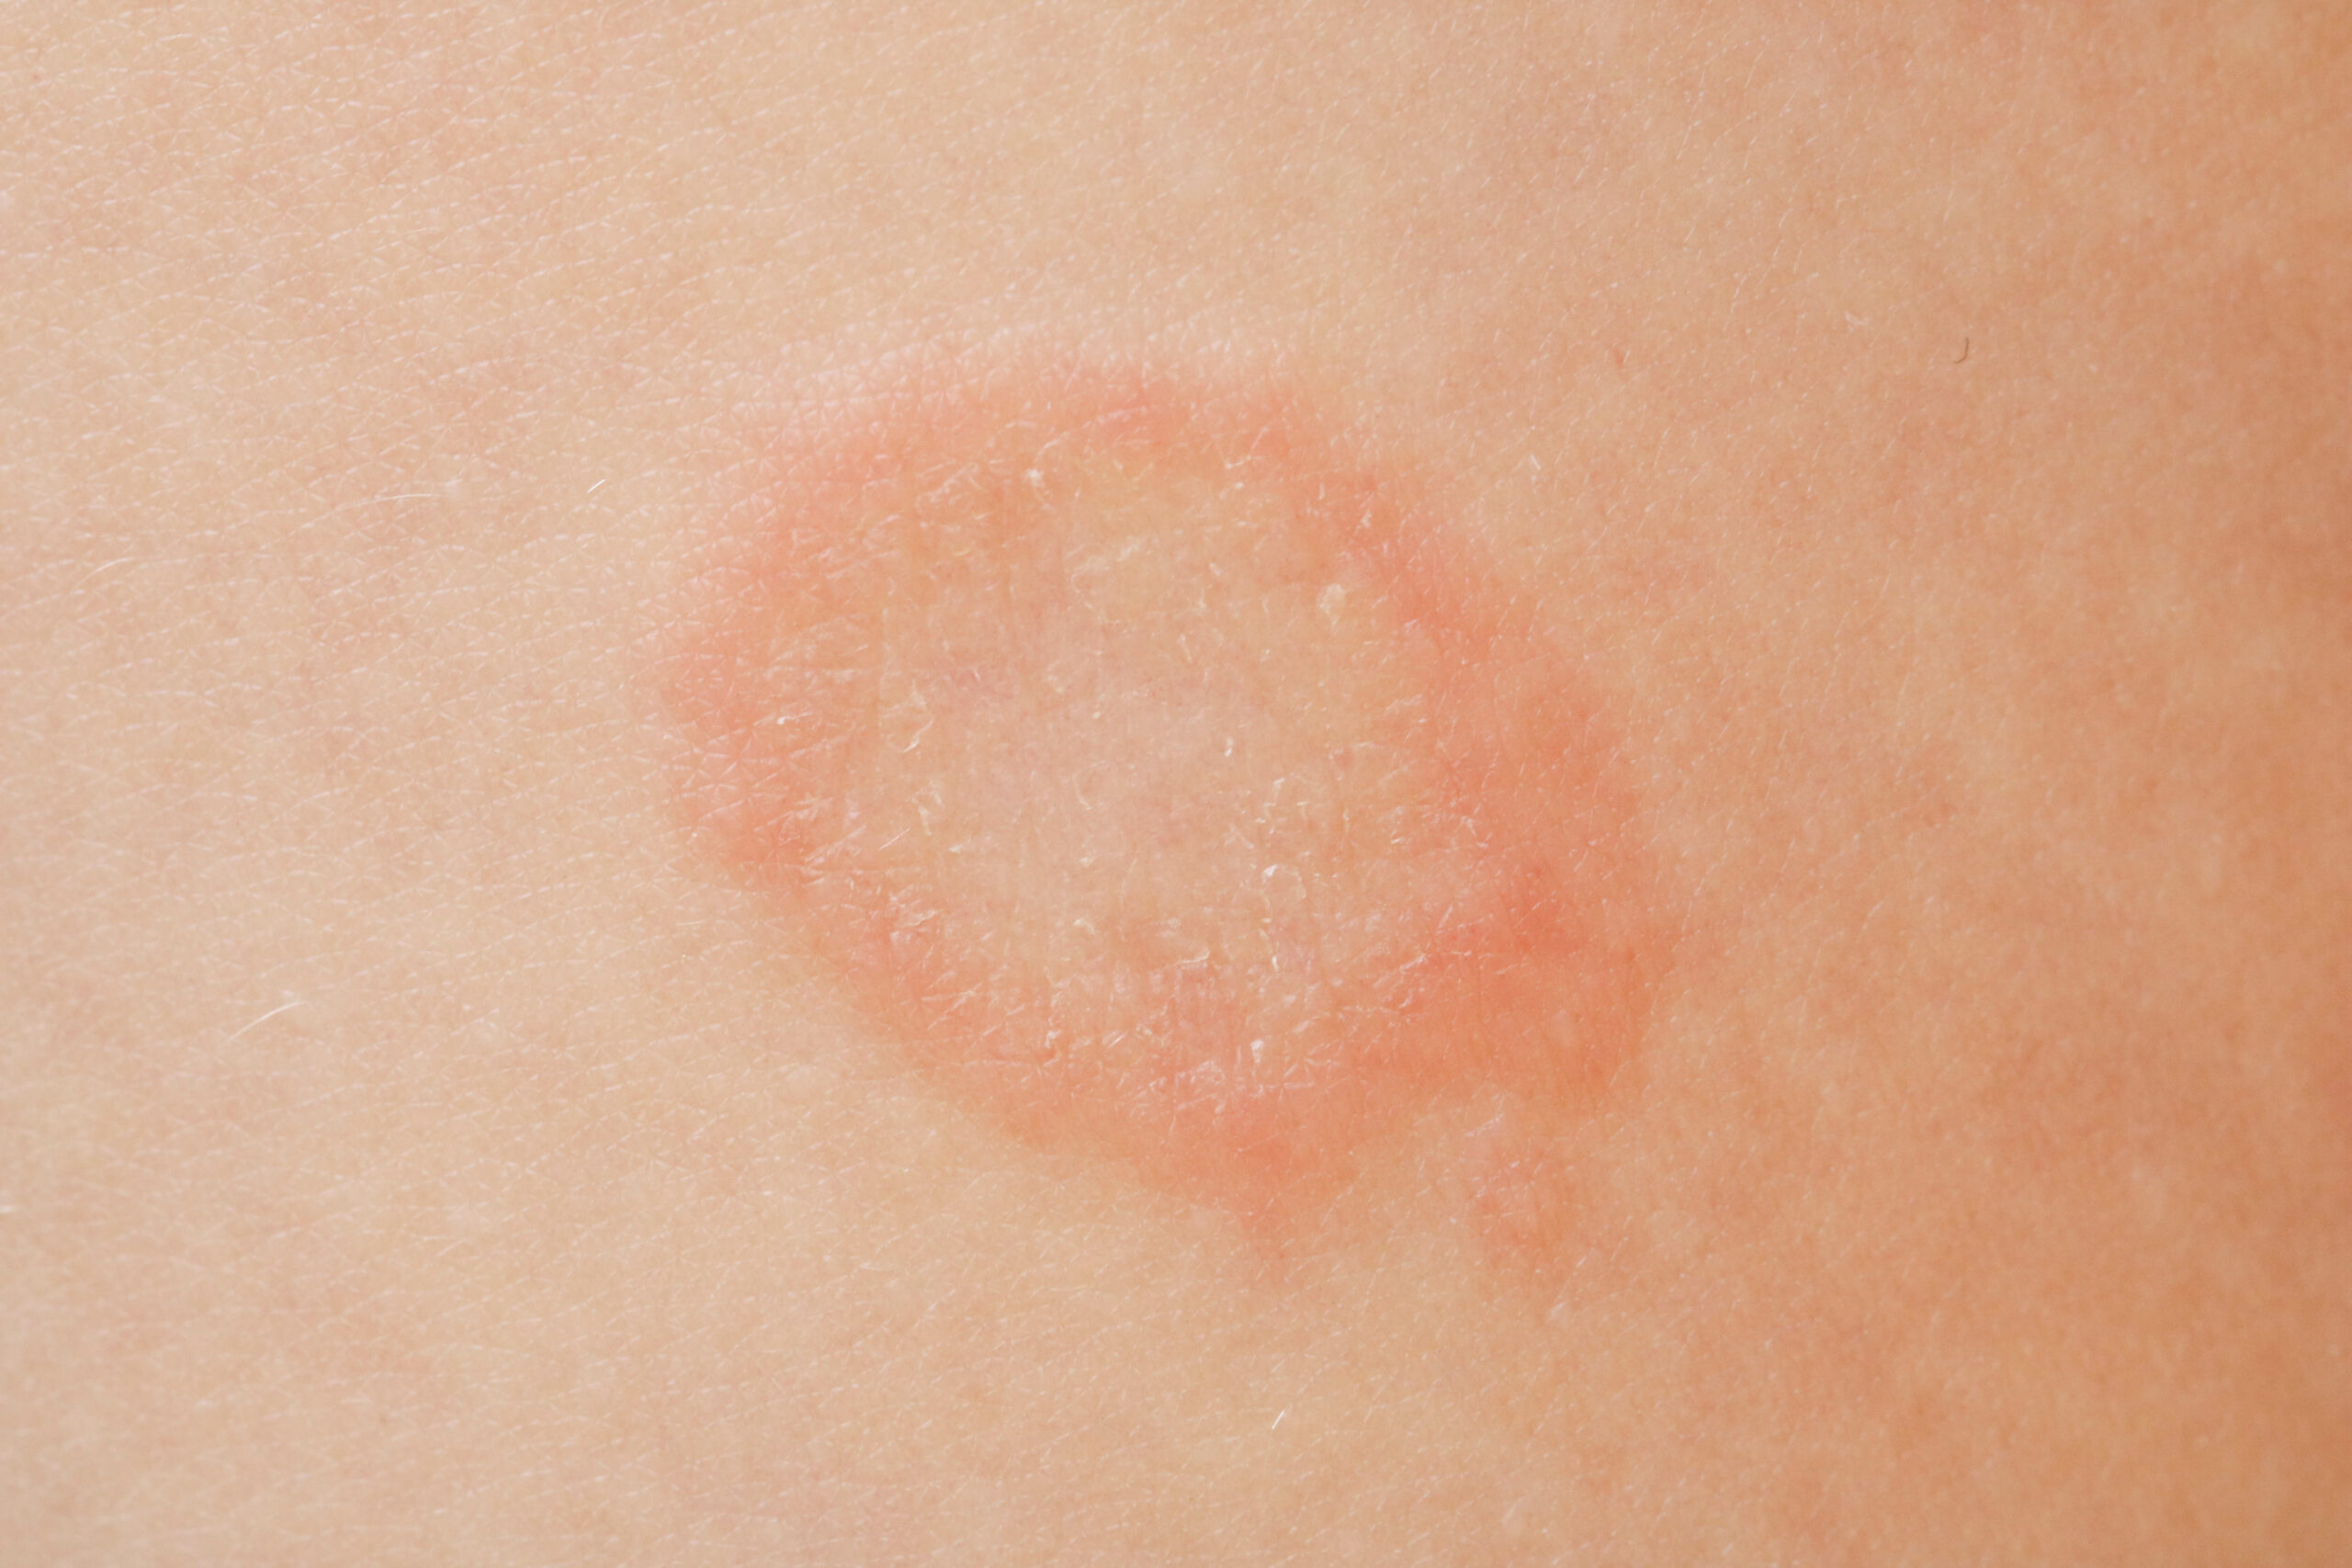 Ringworm on a child's skin. 